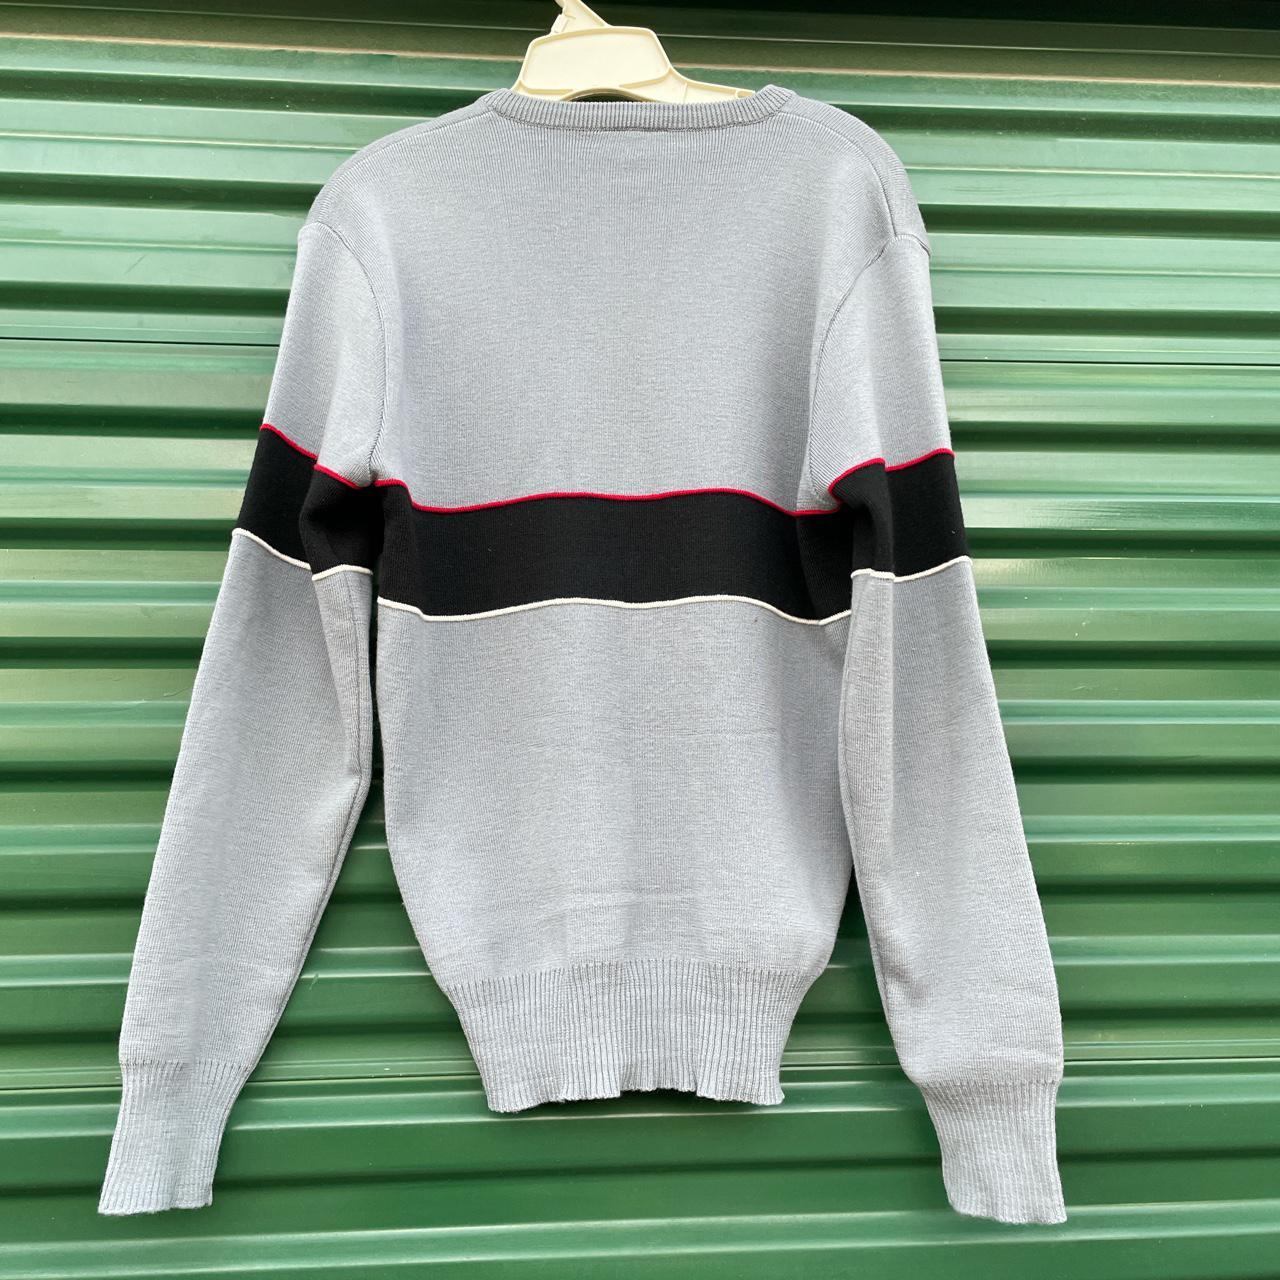 Product Image 2 - Vintage 80s Meister Sweater 🕺🏻

Size: